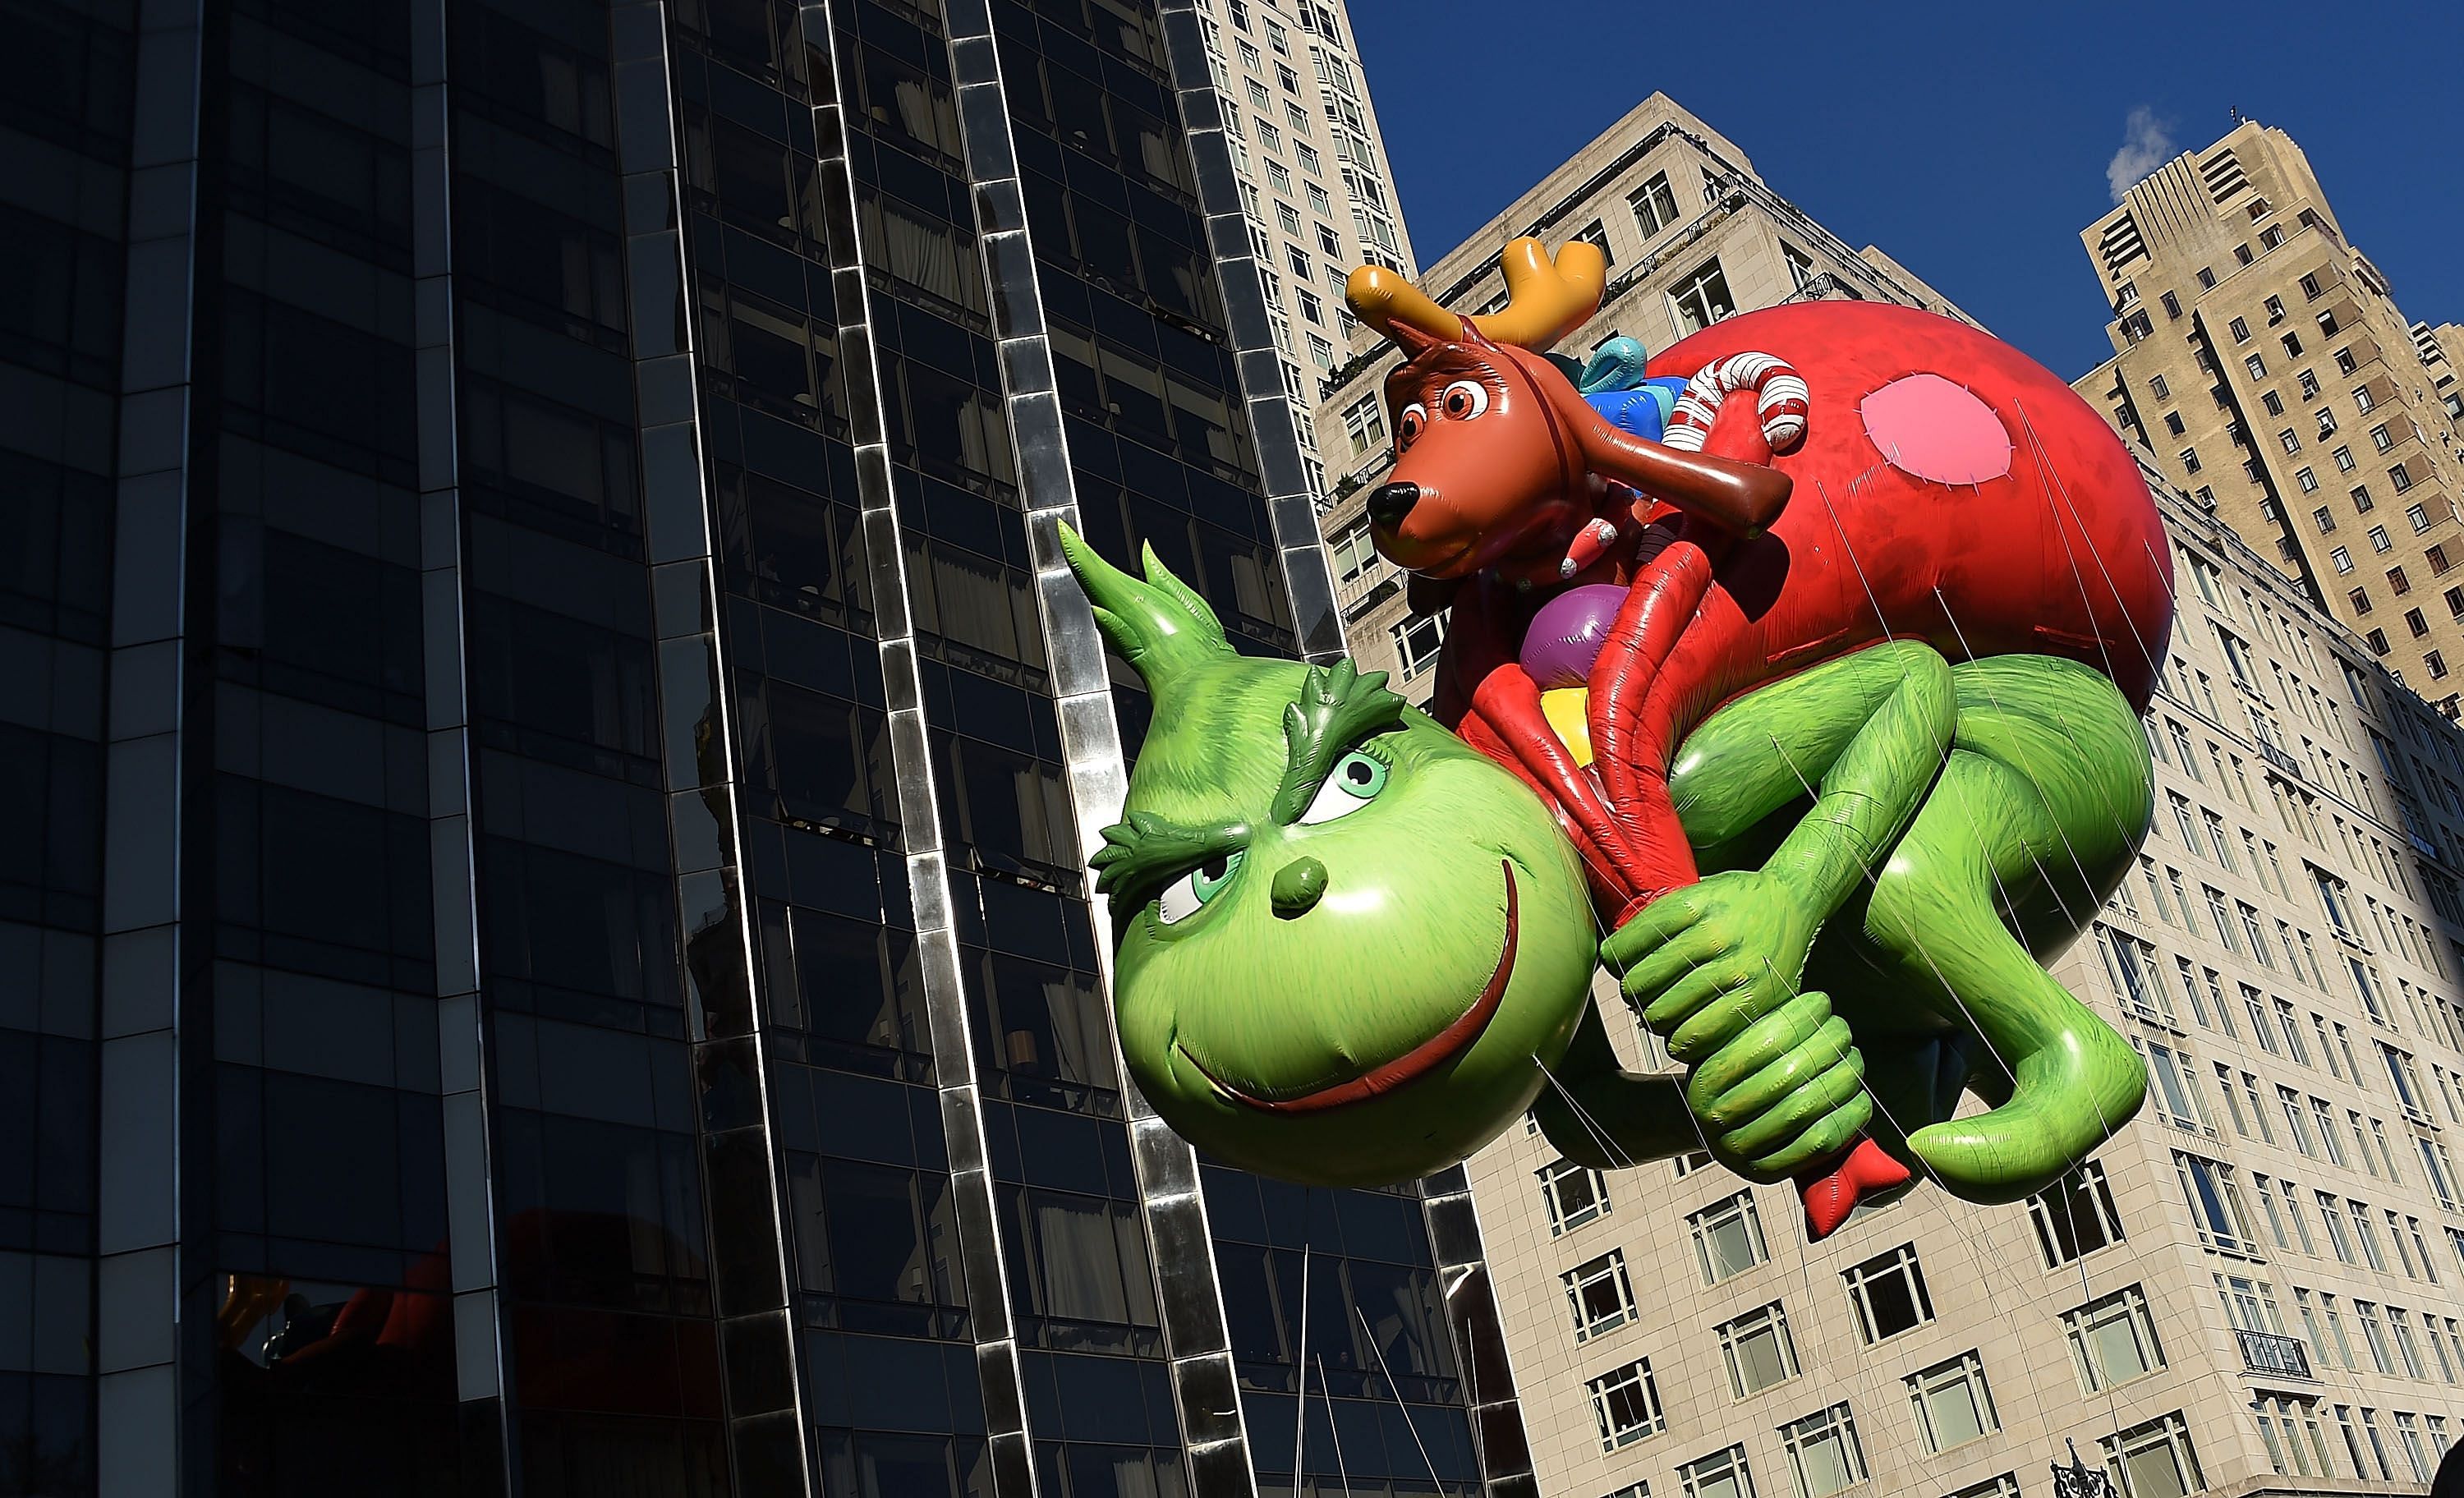 Steer clear of the Grinch.  This green children’s story character was created by Dr Seuss for his book, How The Grinch Stole Christmas. The balloon in his likeness is seen here during the 91st Annual Macy's Thanksgiving Day Parade  in New York City. PHOTO